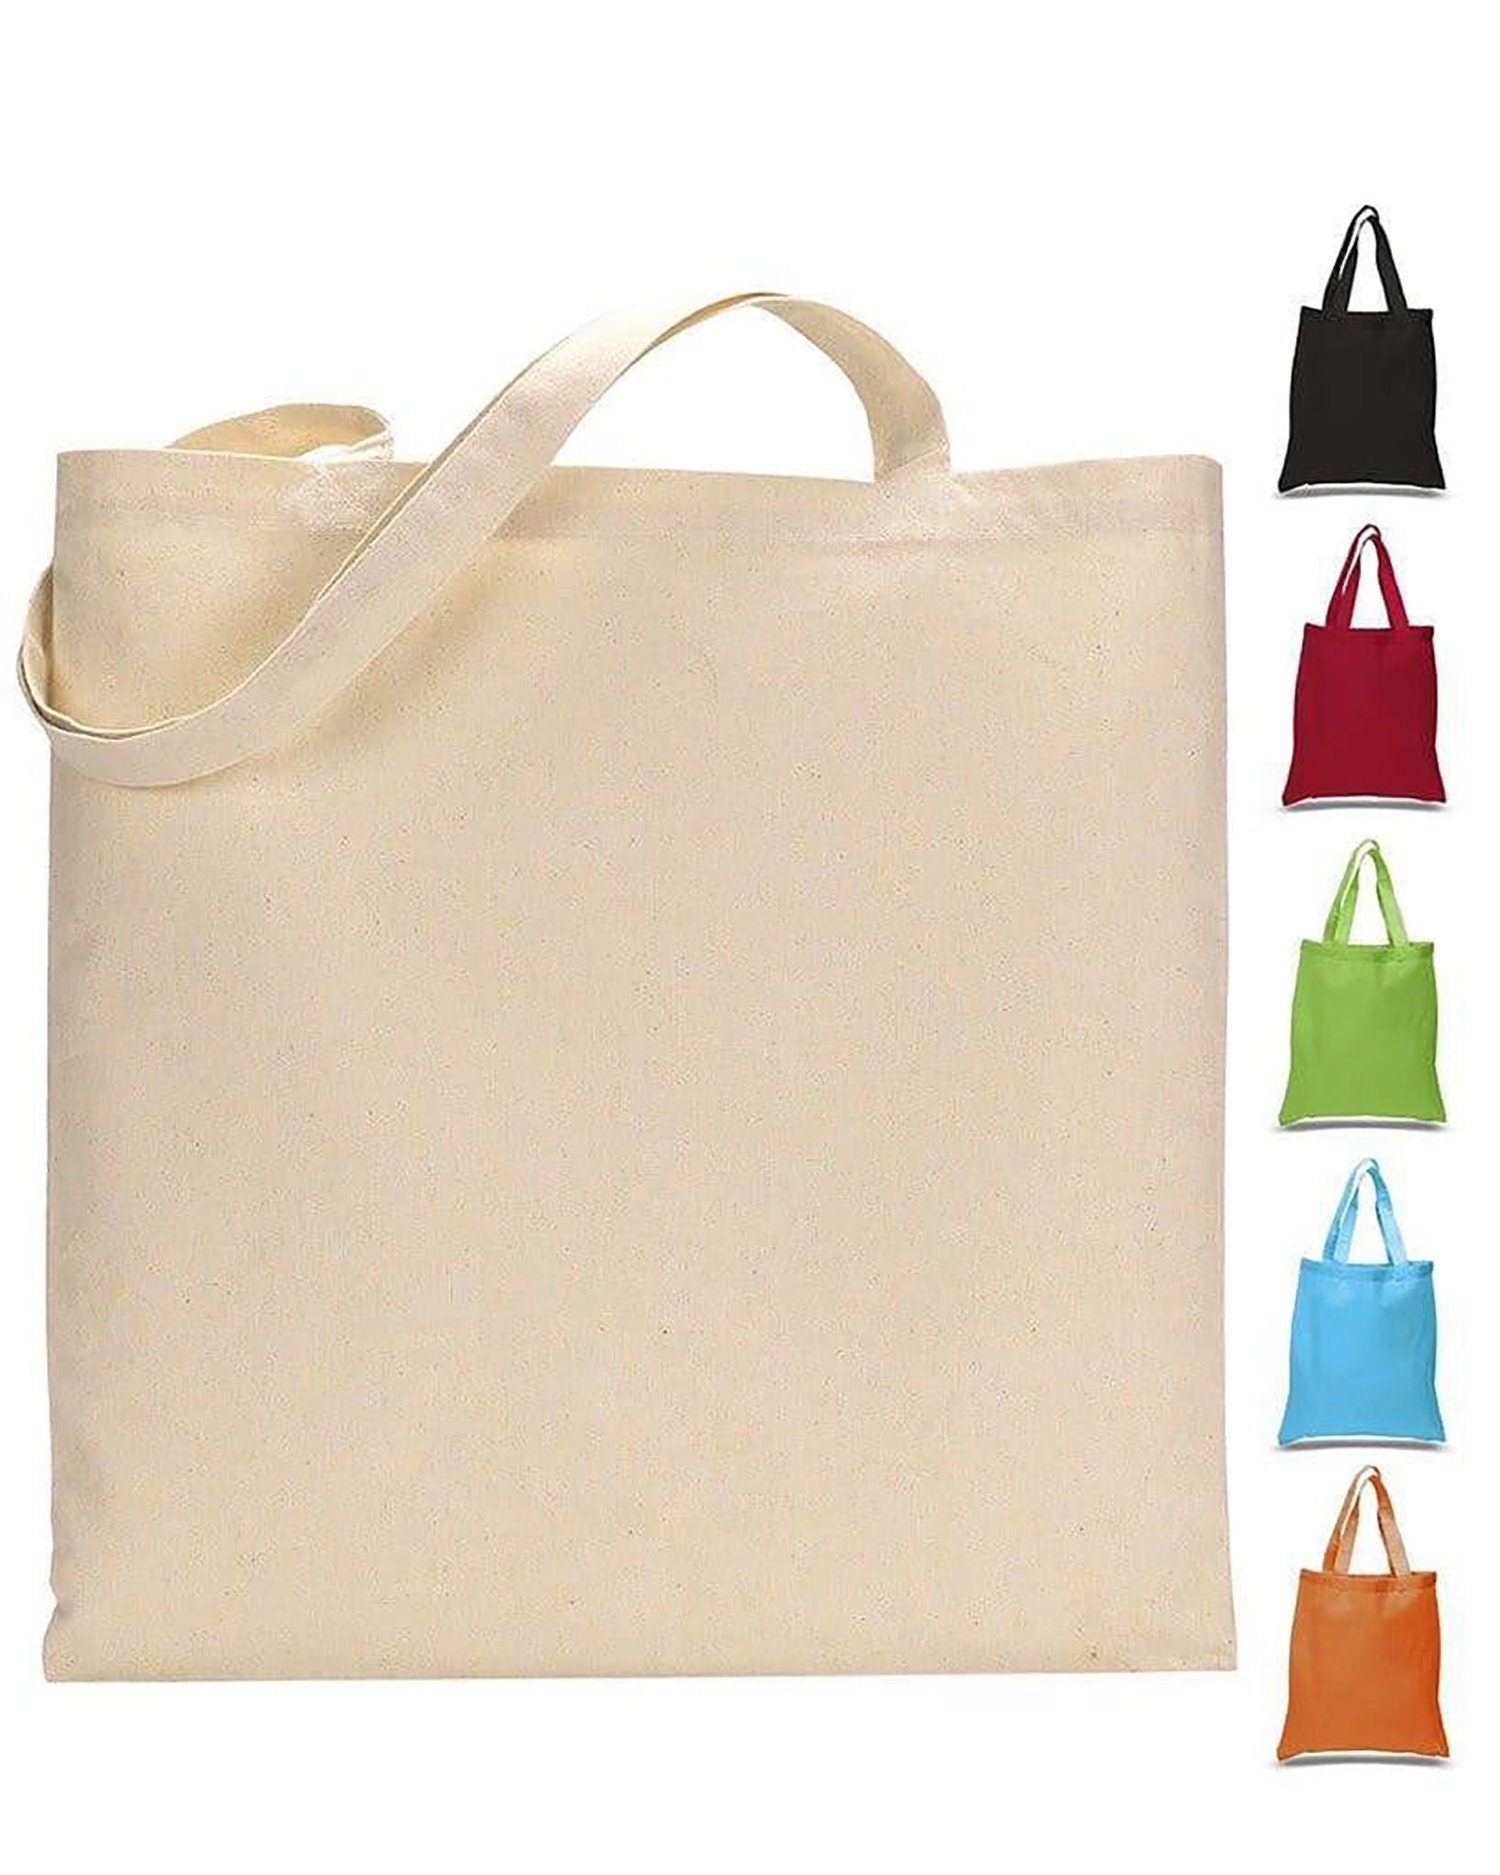 12 Pack Wholesale Sublimation Tote Bags Blank Canvas Tote Bags Grocery Bags  for Heat Transfer Vinyl DIY Crafting White